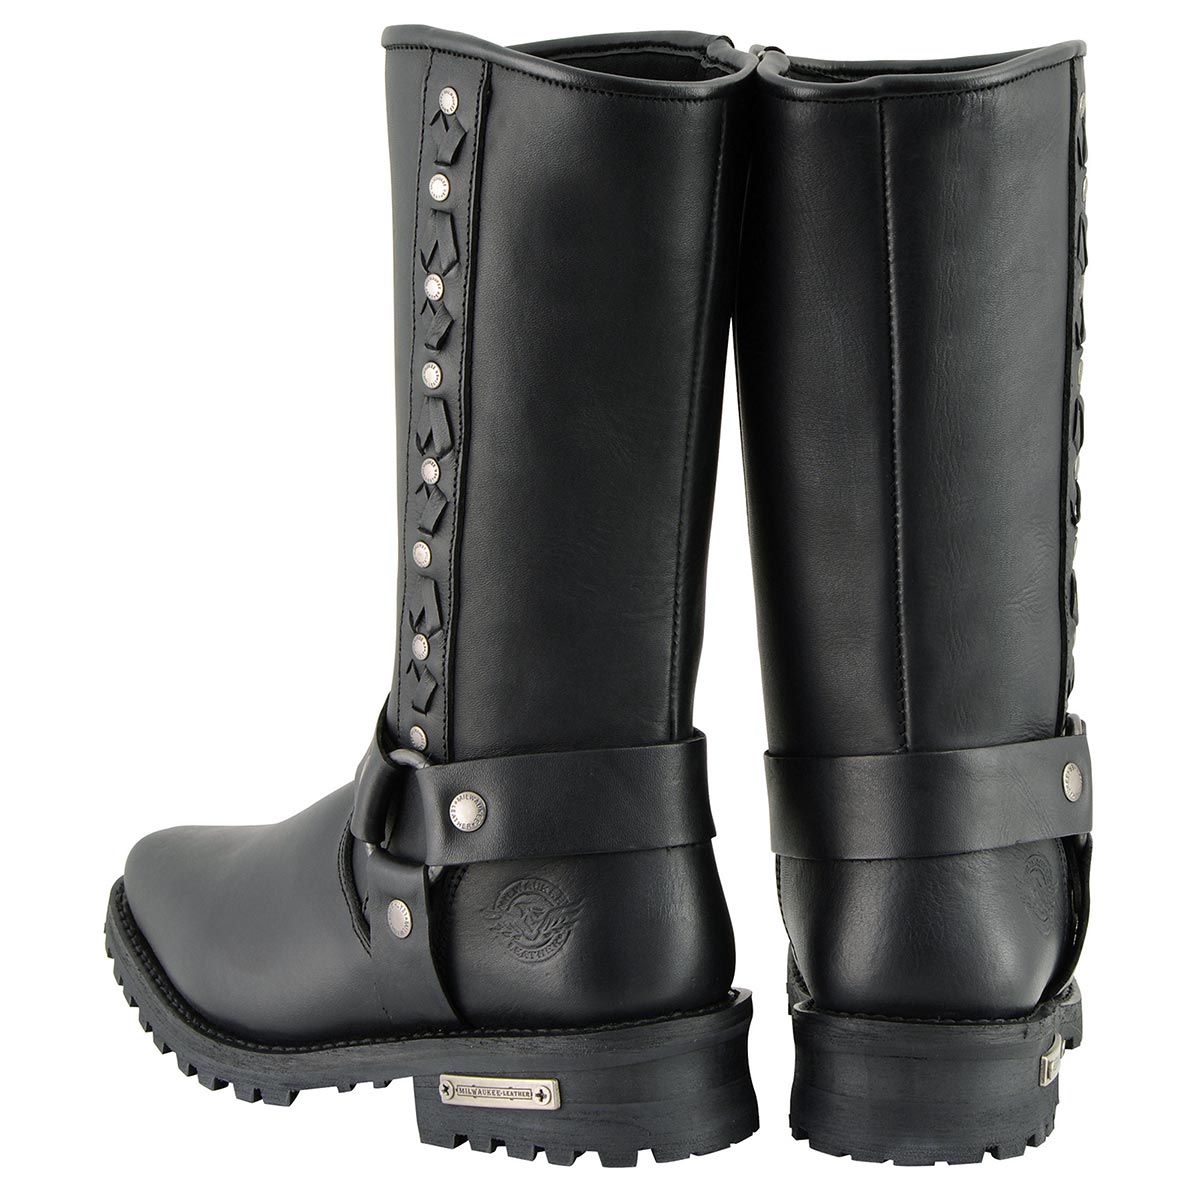 Milwaukee Leather MBM9025 Men's Black Harness Motorcycle Boots with Braid and Riveted Details